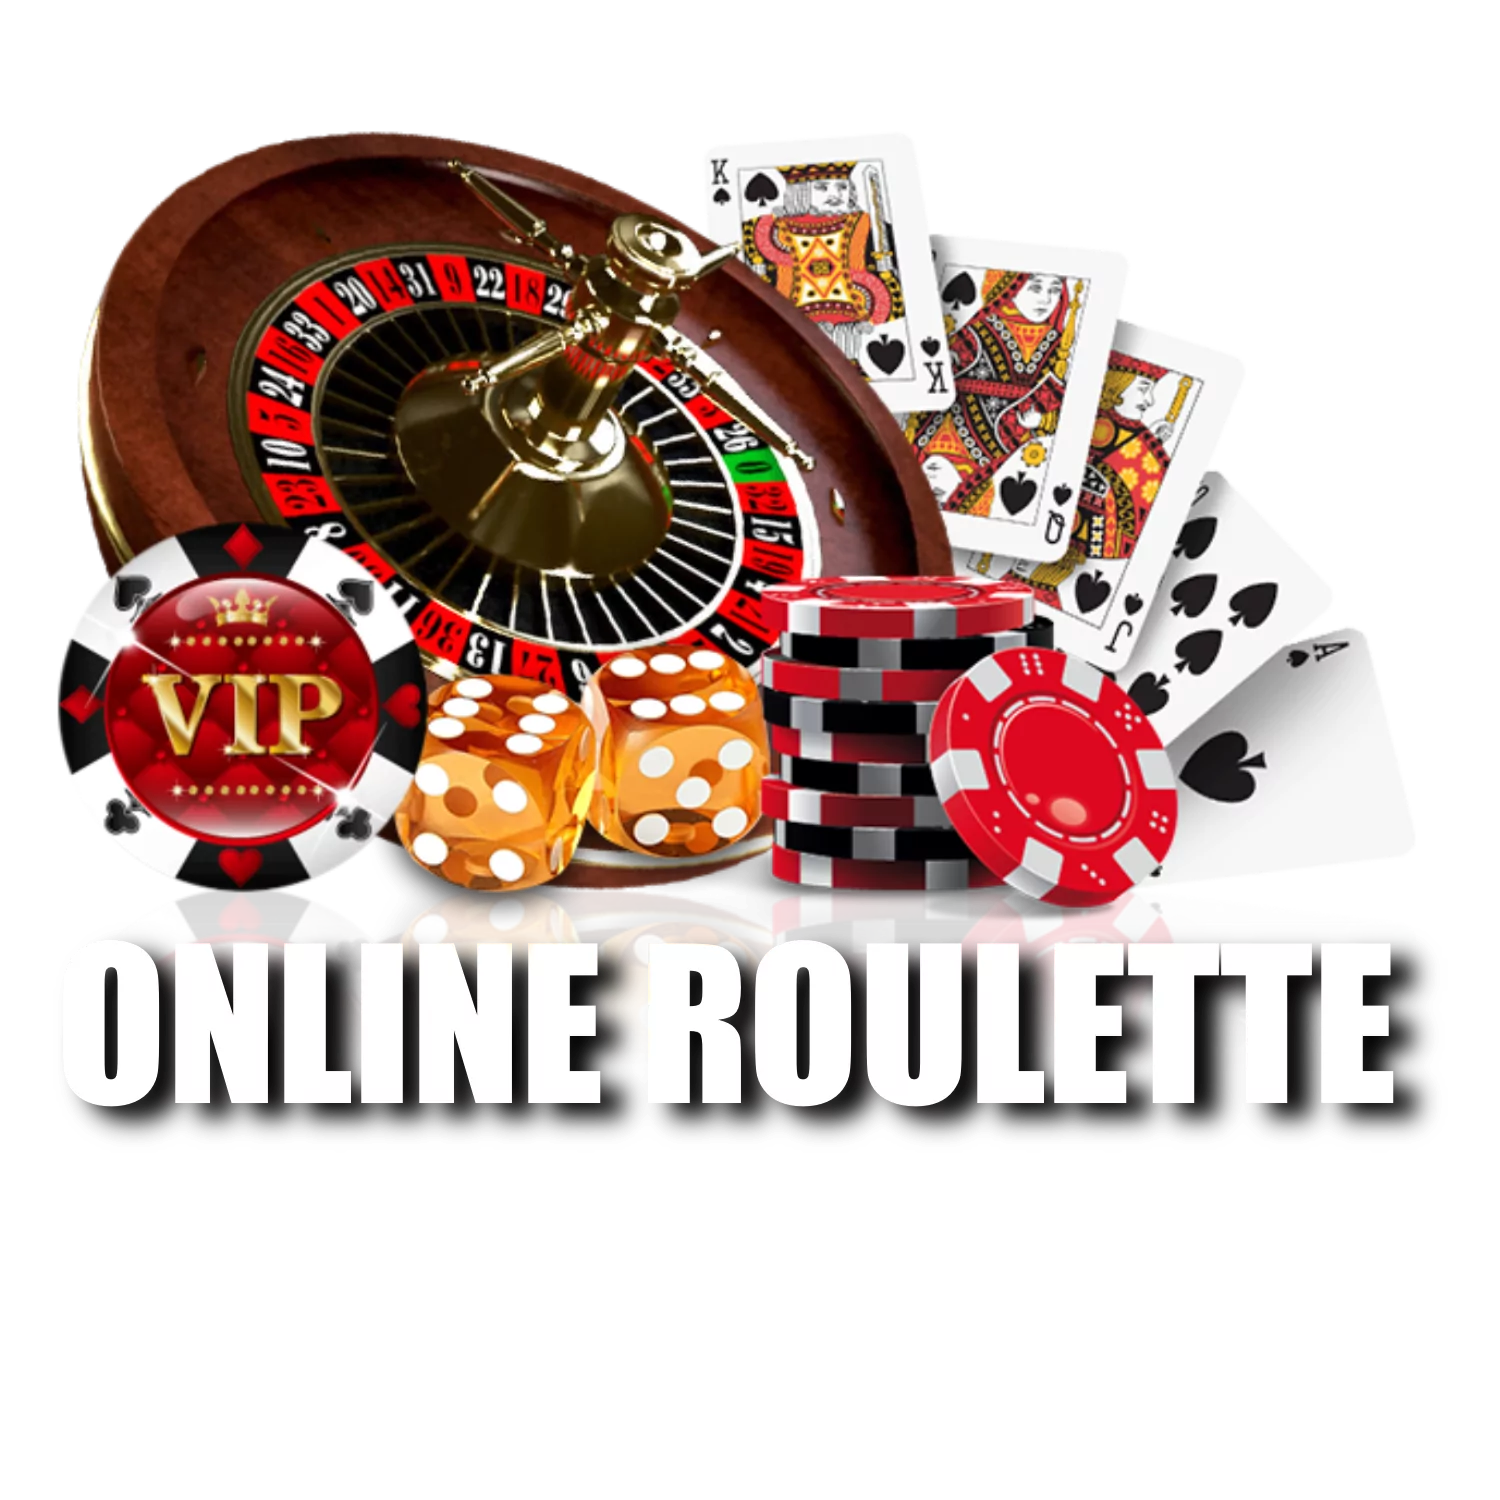 Learn more about online roulette and the casinos that offer this game.